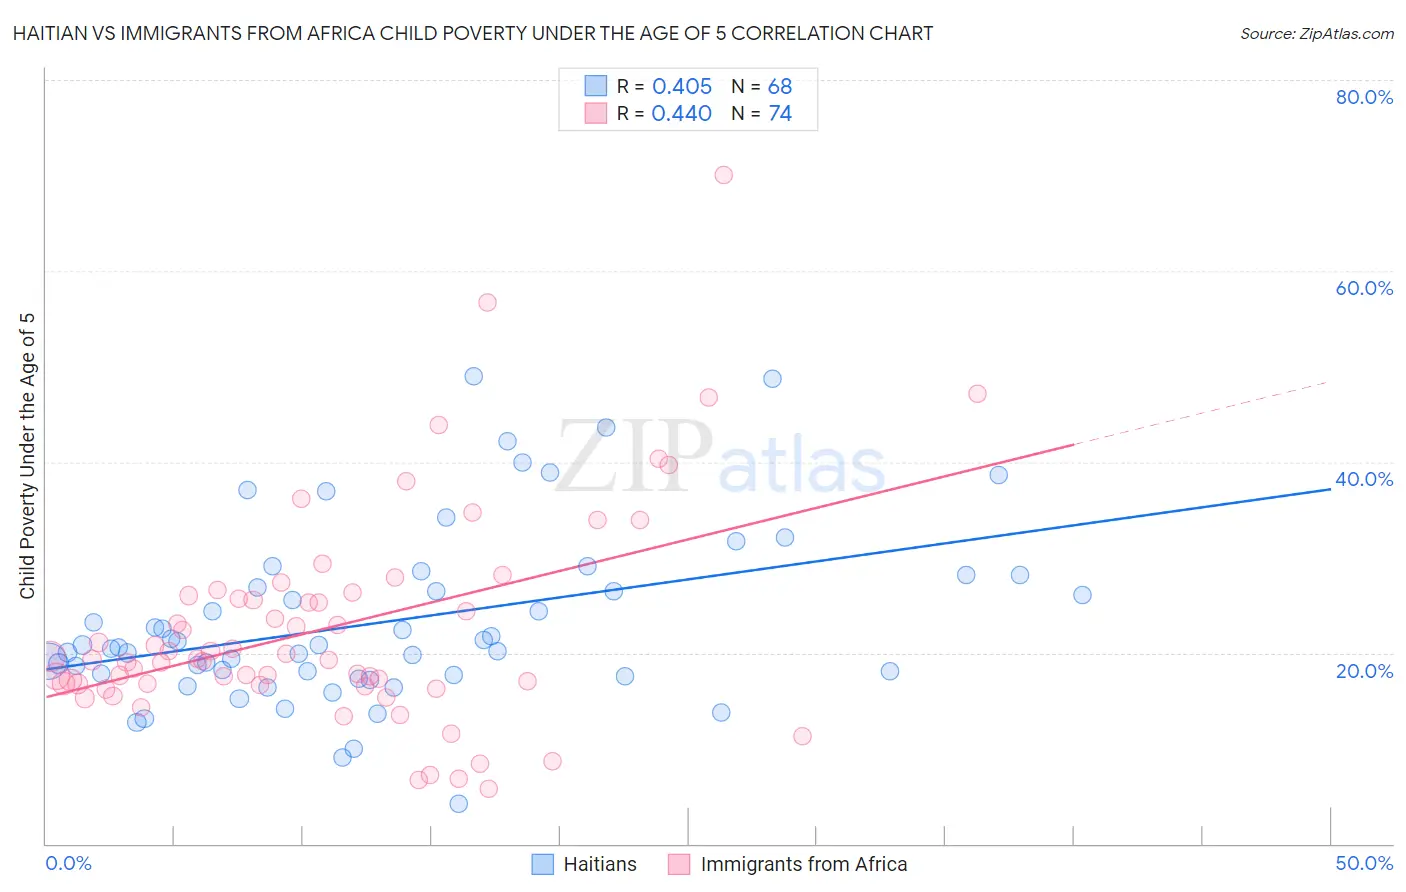 Haitian vs Immigrants from Africa Child Poverty Under the Age of 5